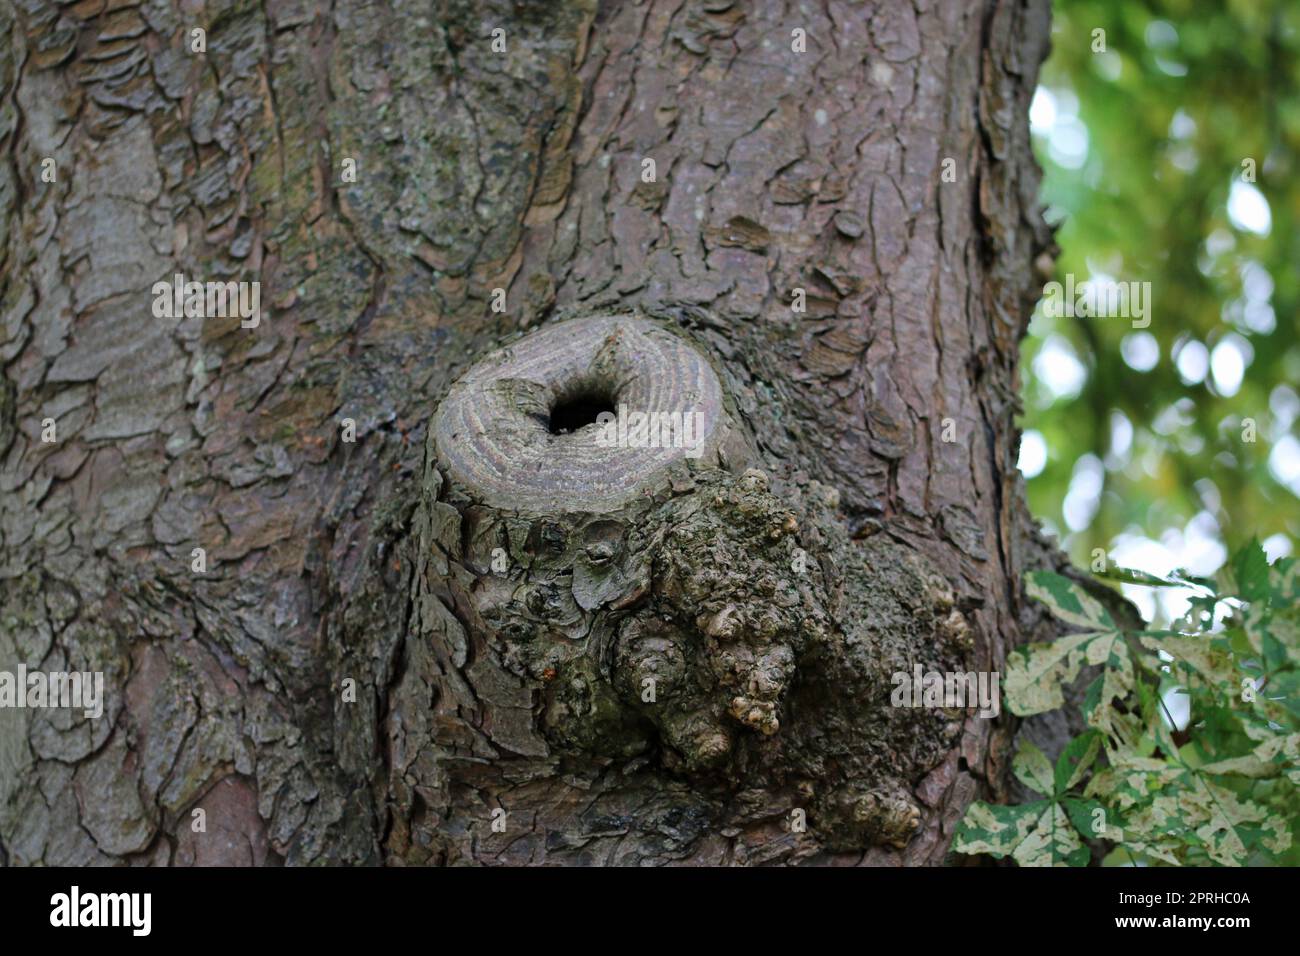 Horse chestnut tree surgery branch pruning trunk wound scar Stock Photo